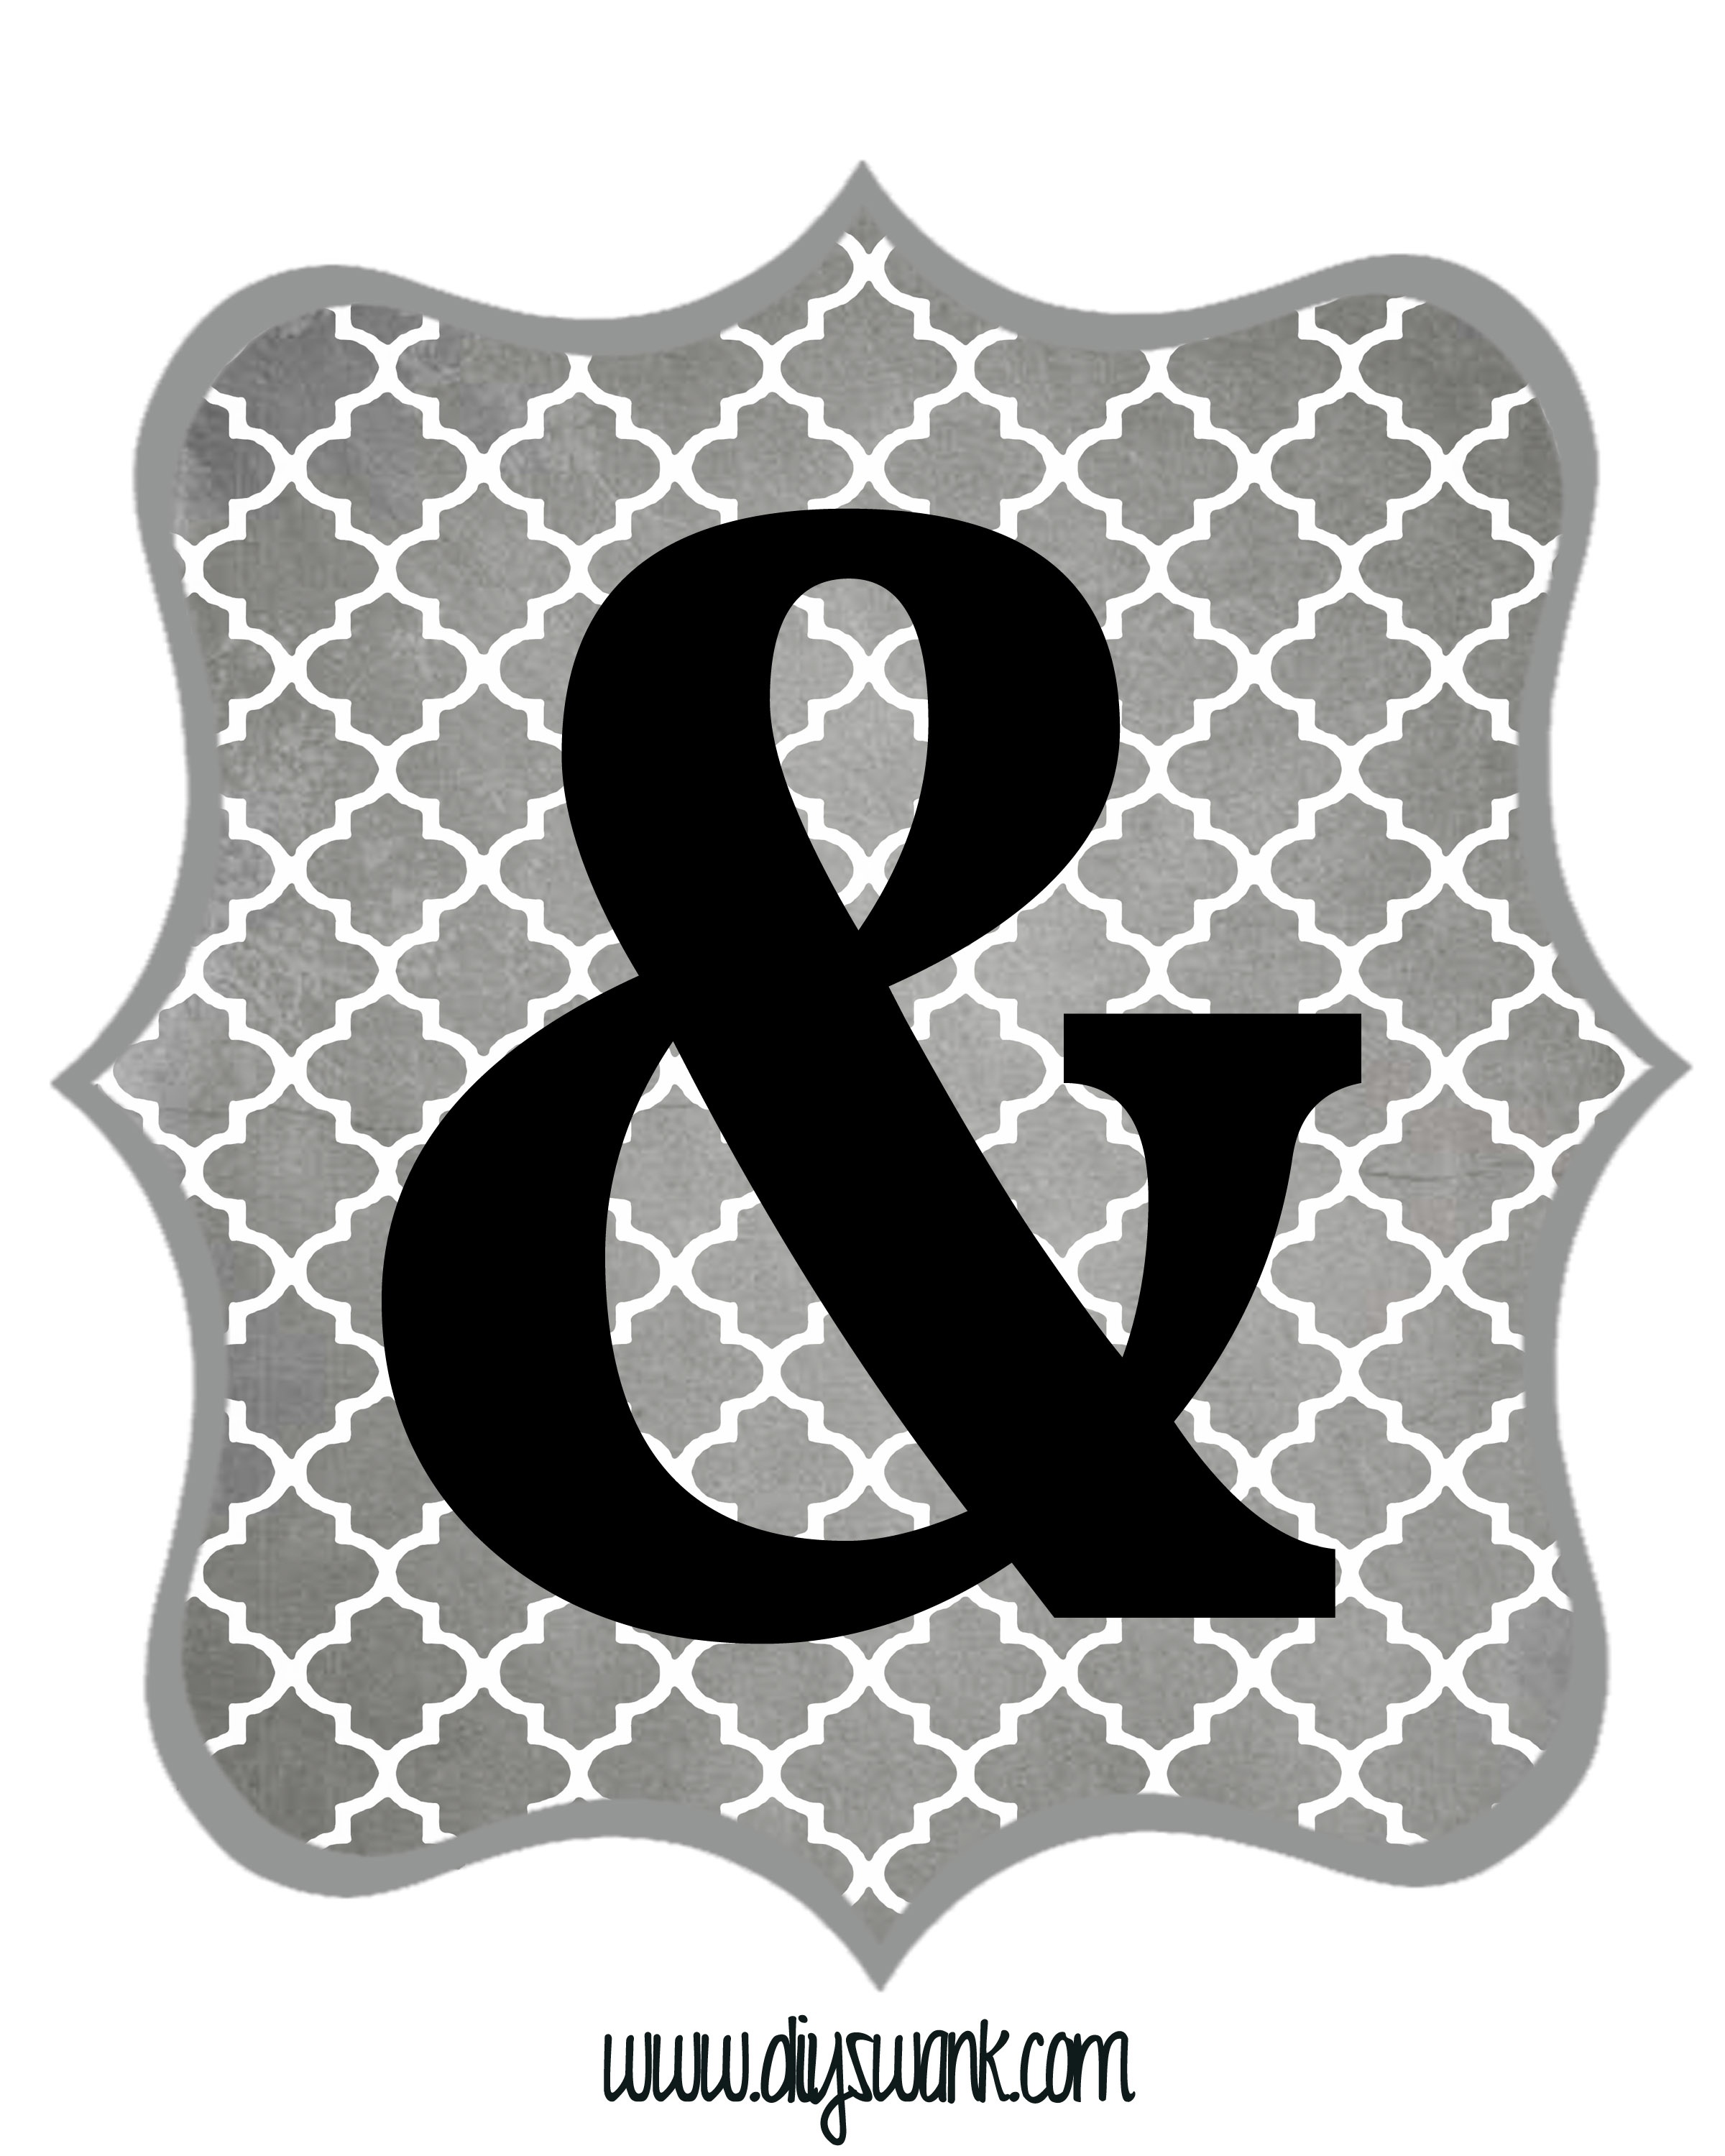 Free Printable Letters Gray And Black | Diy Swank - Diy Swank Free Printable Letters